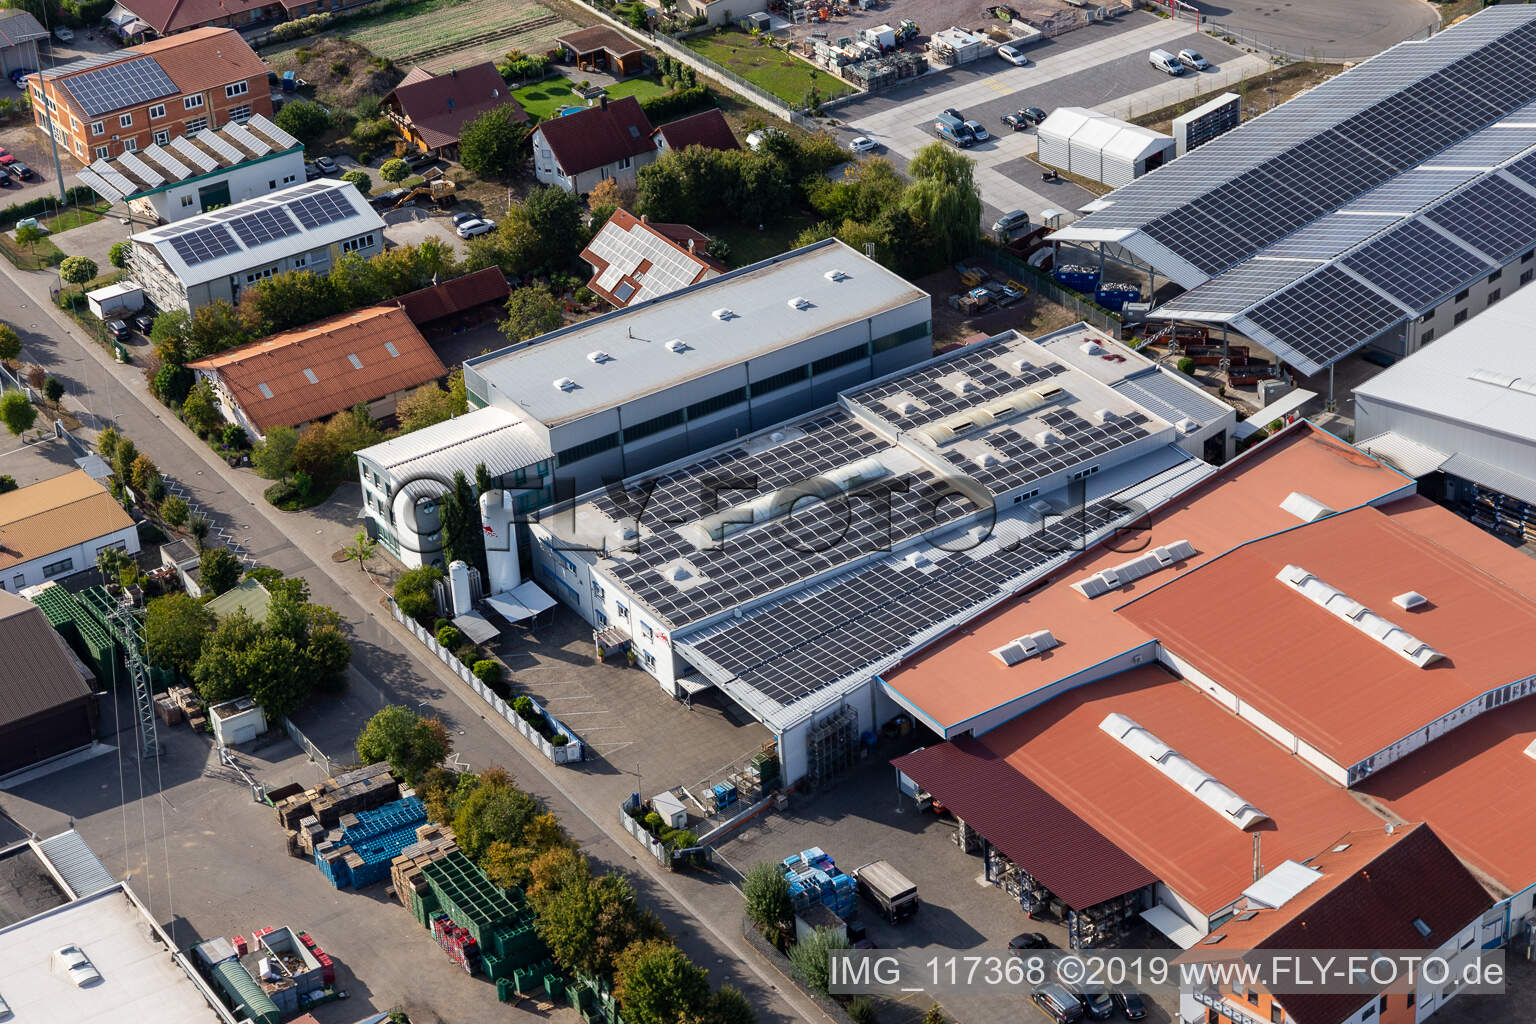 Bird's eye view of Commercial area Im Gereut, HGGS LaserCUT GmbH & Co. KG in Hatzenbühl in the state Rhineland-Palatinate, Germany